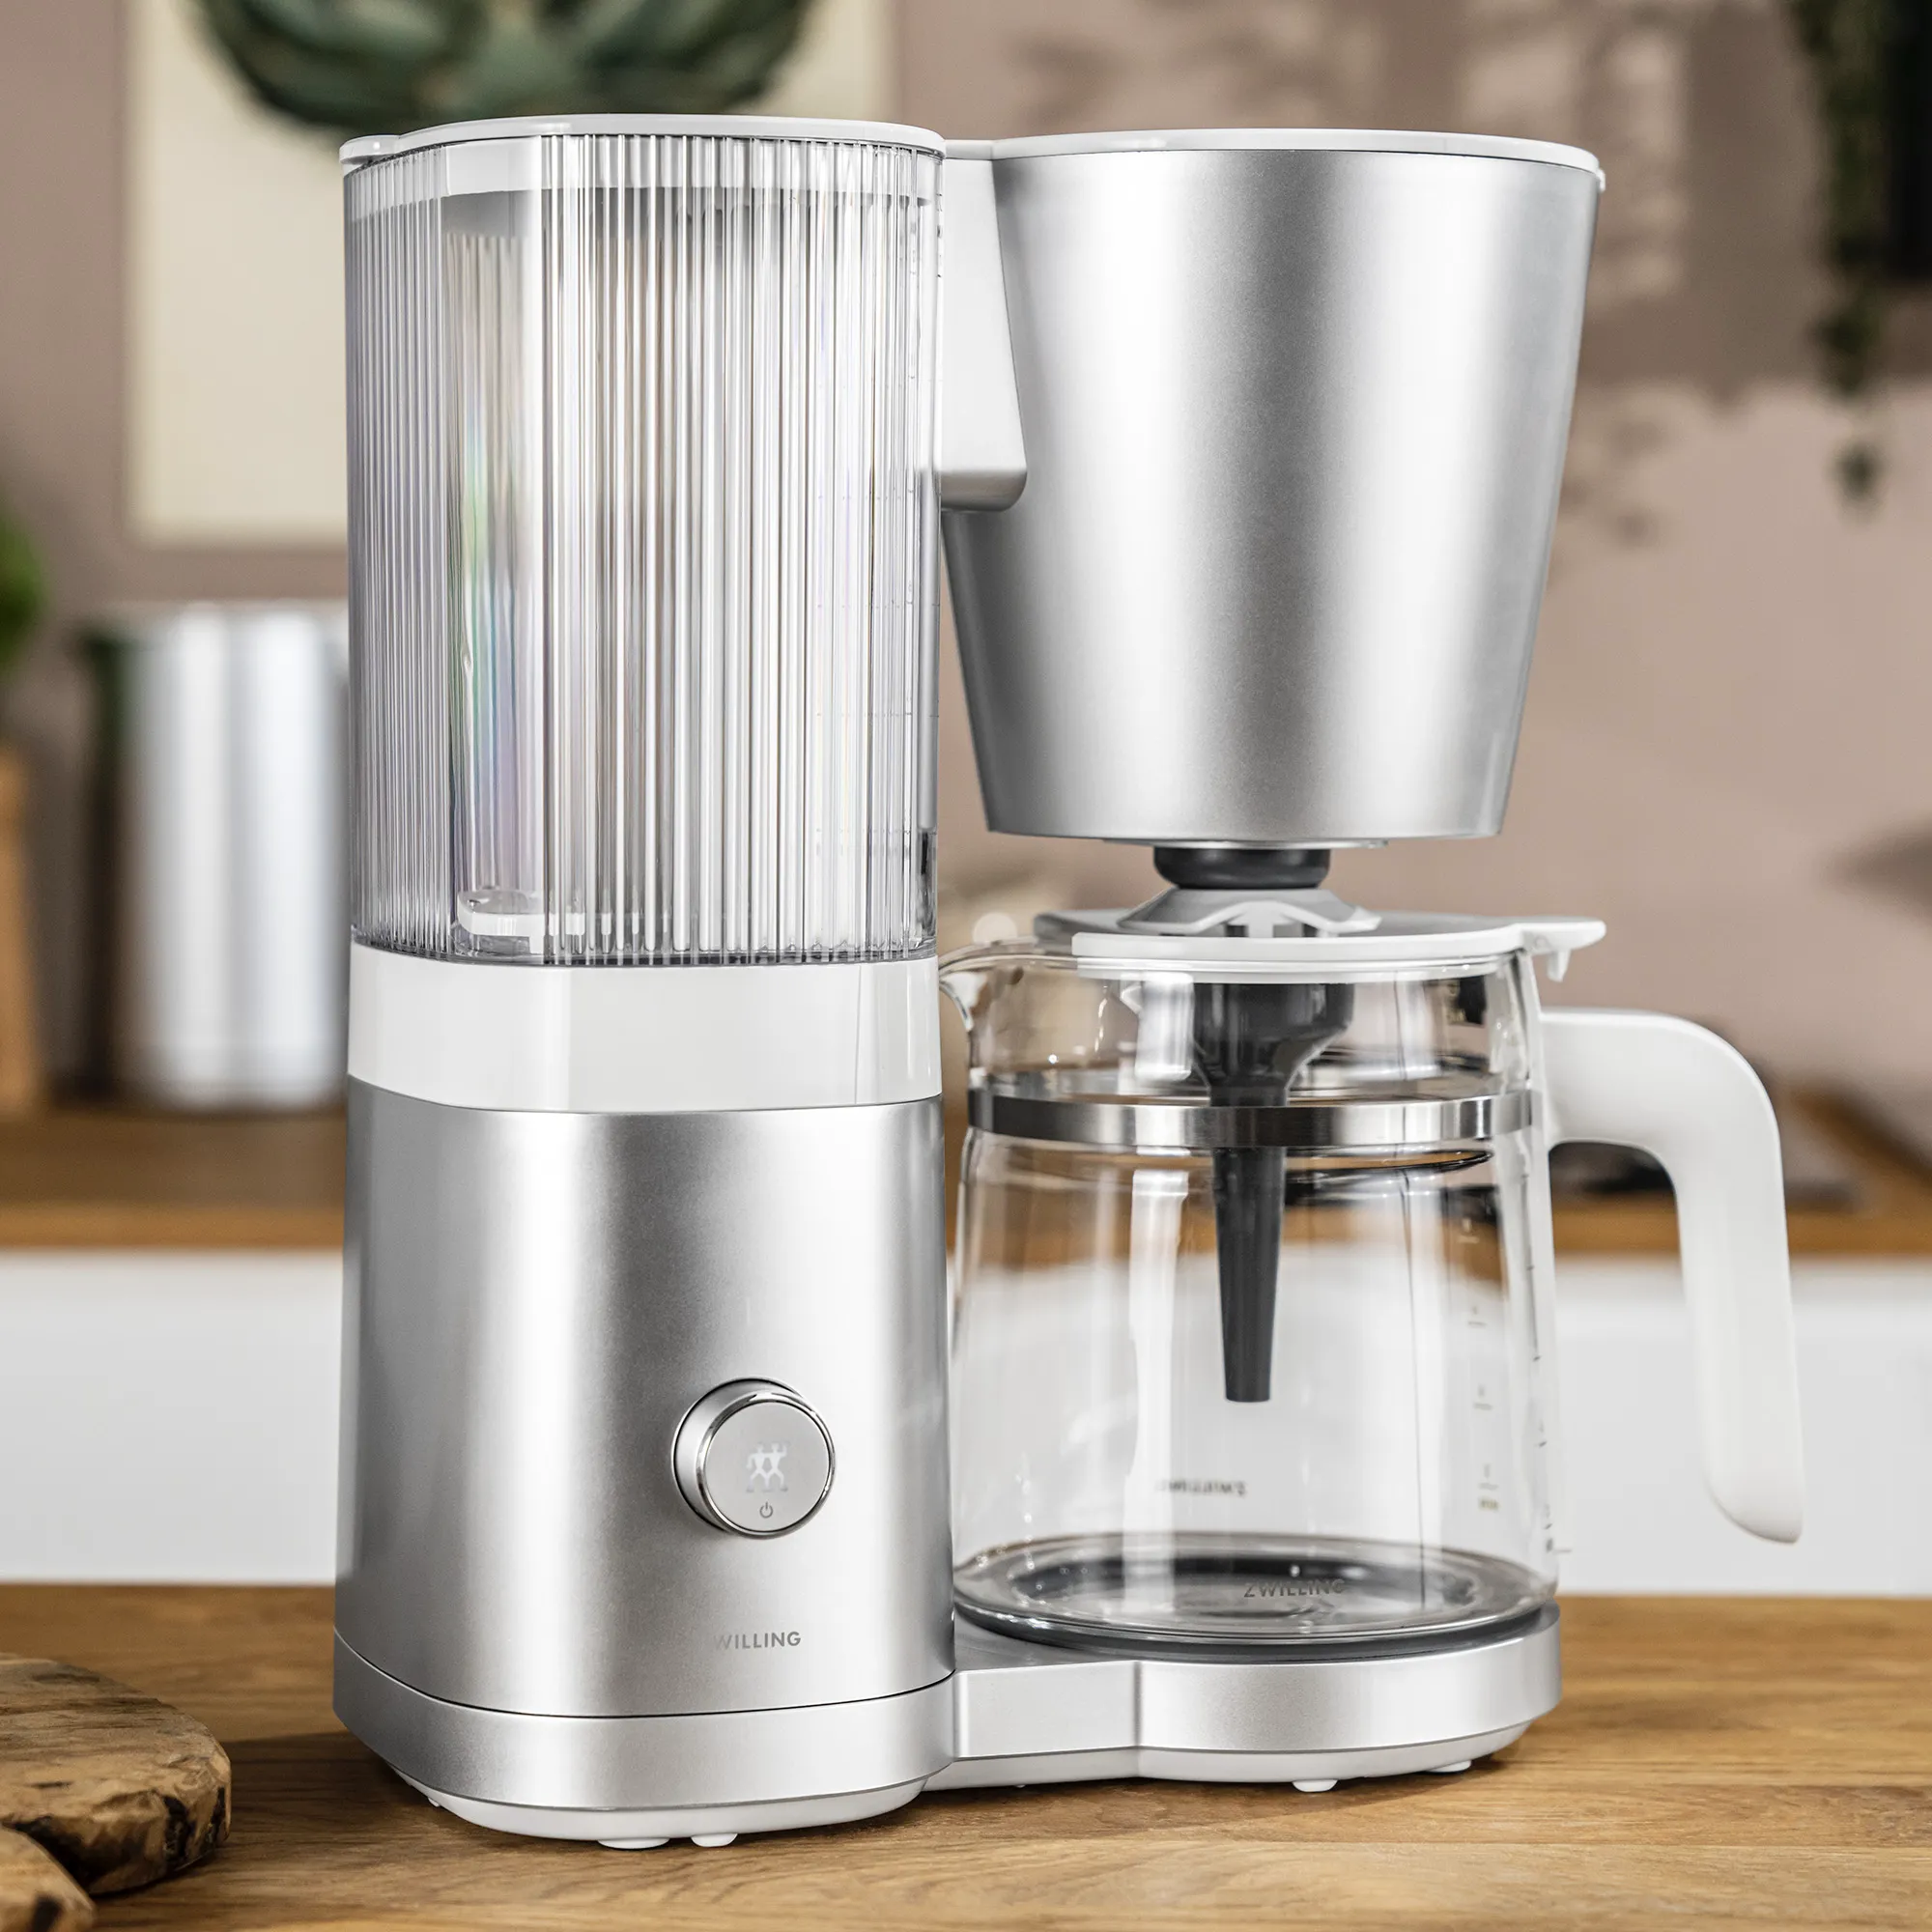 https://www.homethreads.com/files/zwilling/1010587-zwilling-enfinigy-glass-drip-coffee-maker-12-cup-awarded-the-sca-golden-cup-standard-silver-5.webp